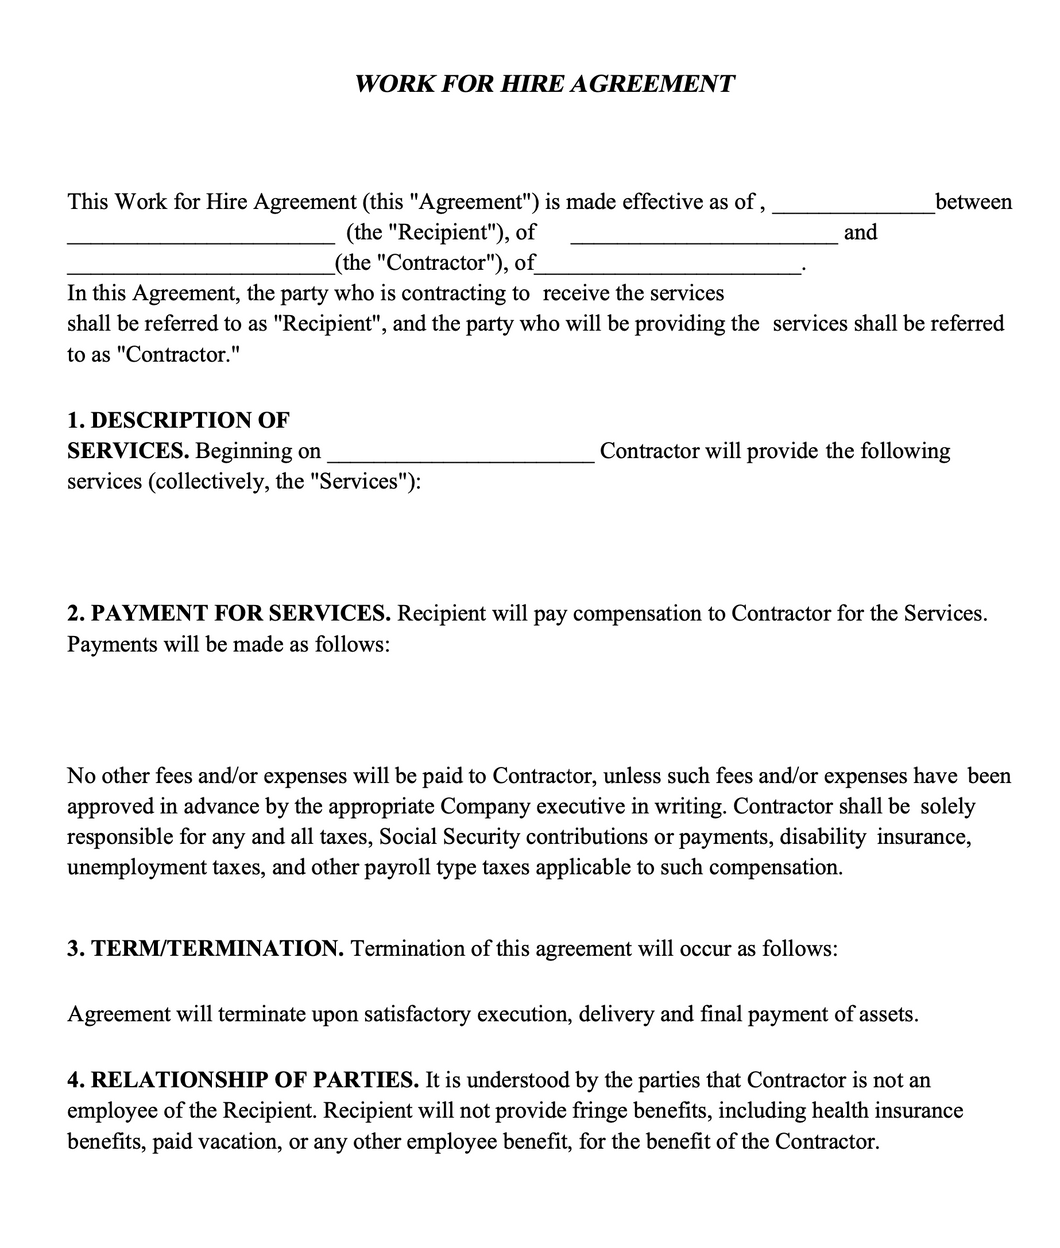 Work for Hire Agreement